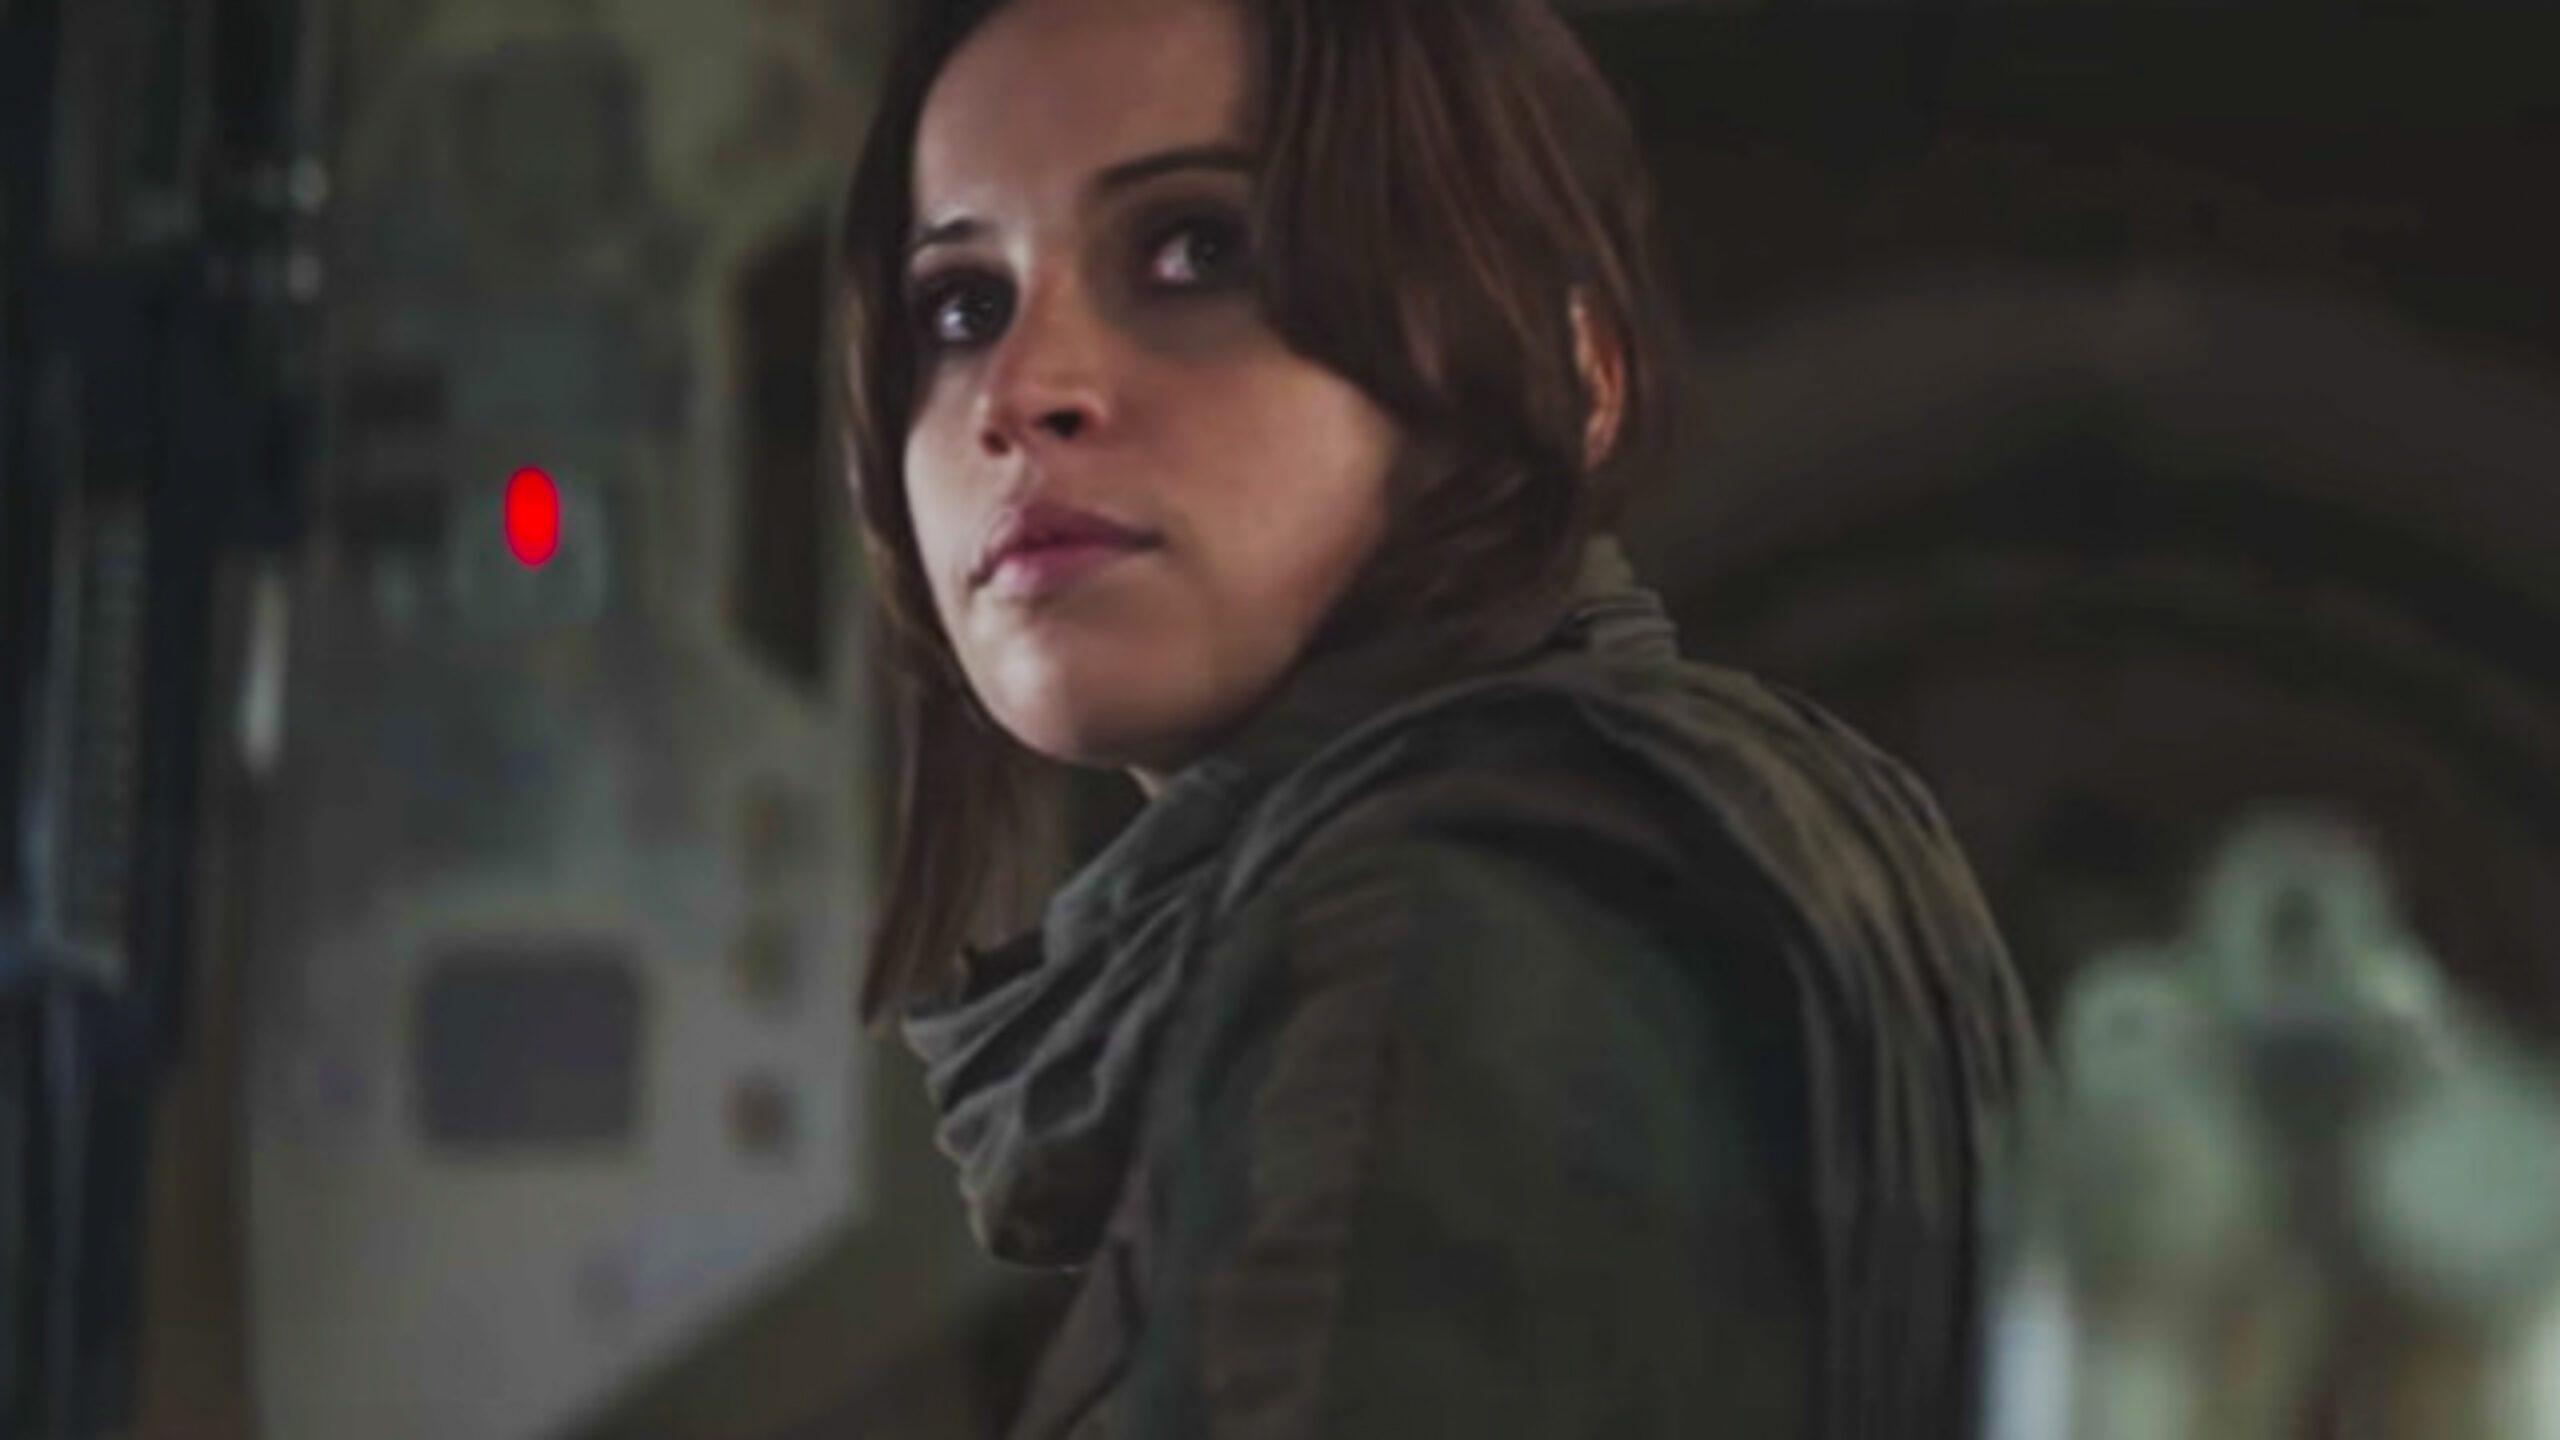 ‘Star Wars’ fans get early Christmas gift with ‘Rogue One’